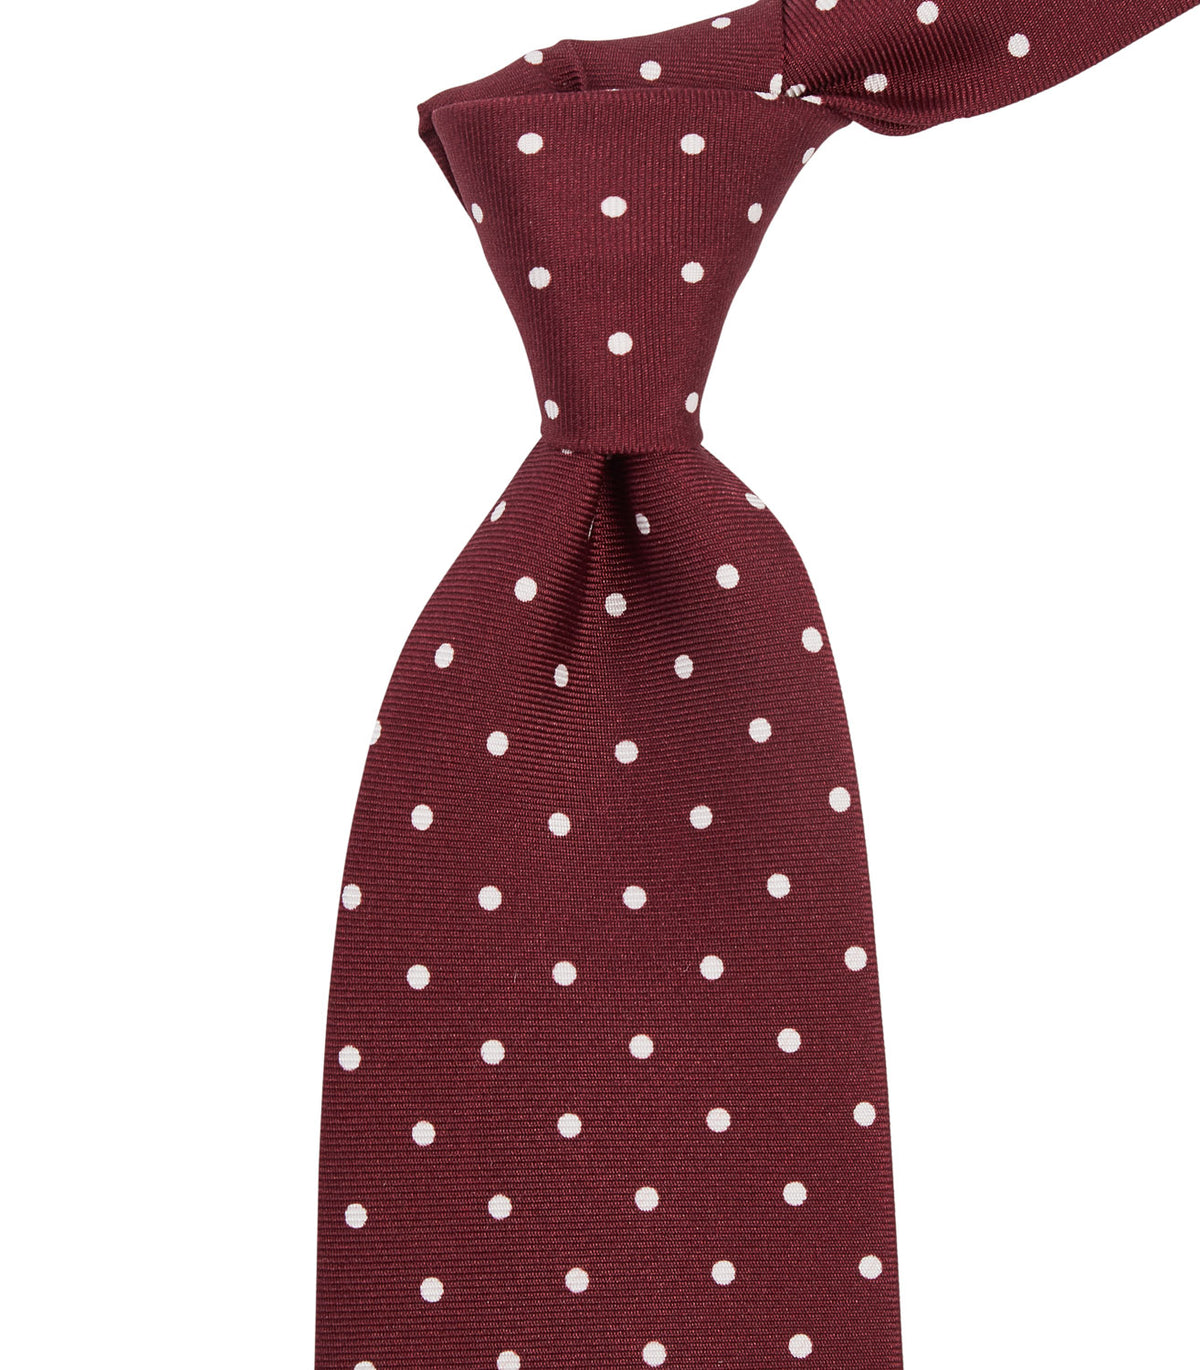 A Sovereign Grade Burgundy London Dot Printed Silk Tie from KirbyAllison.com showcasing craftsmanship and the highest quality.